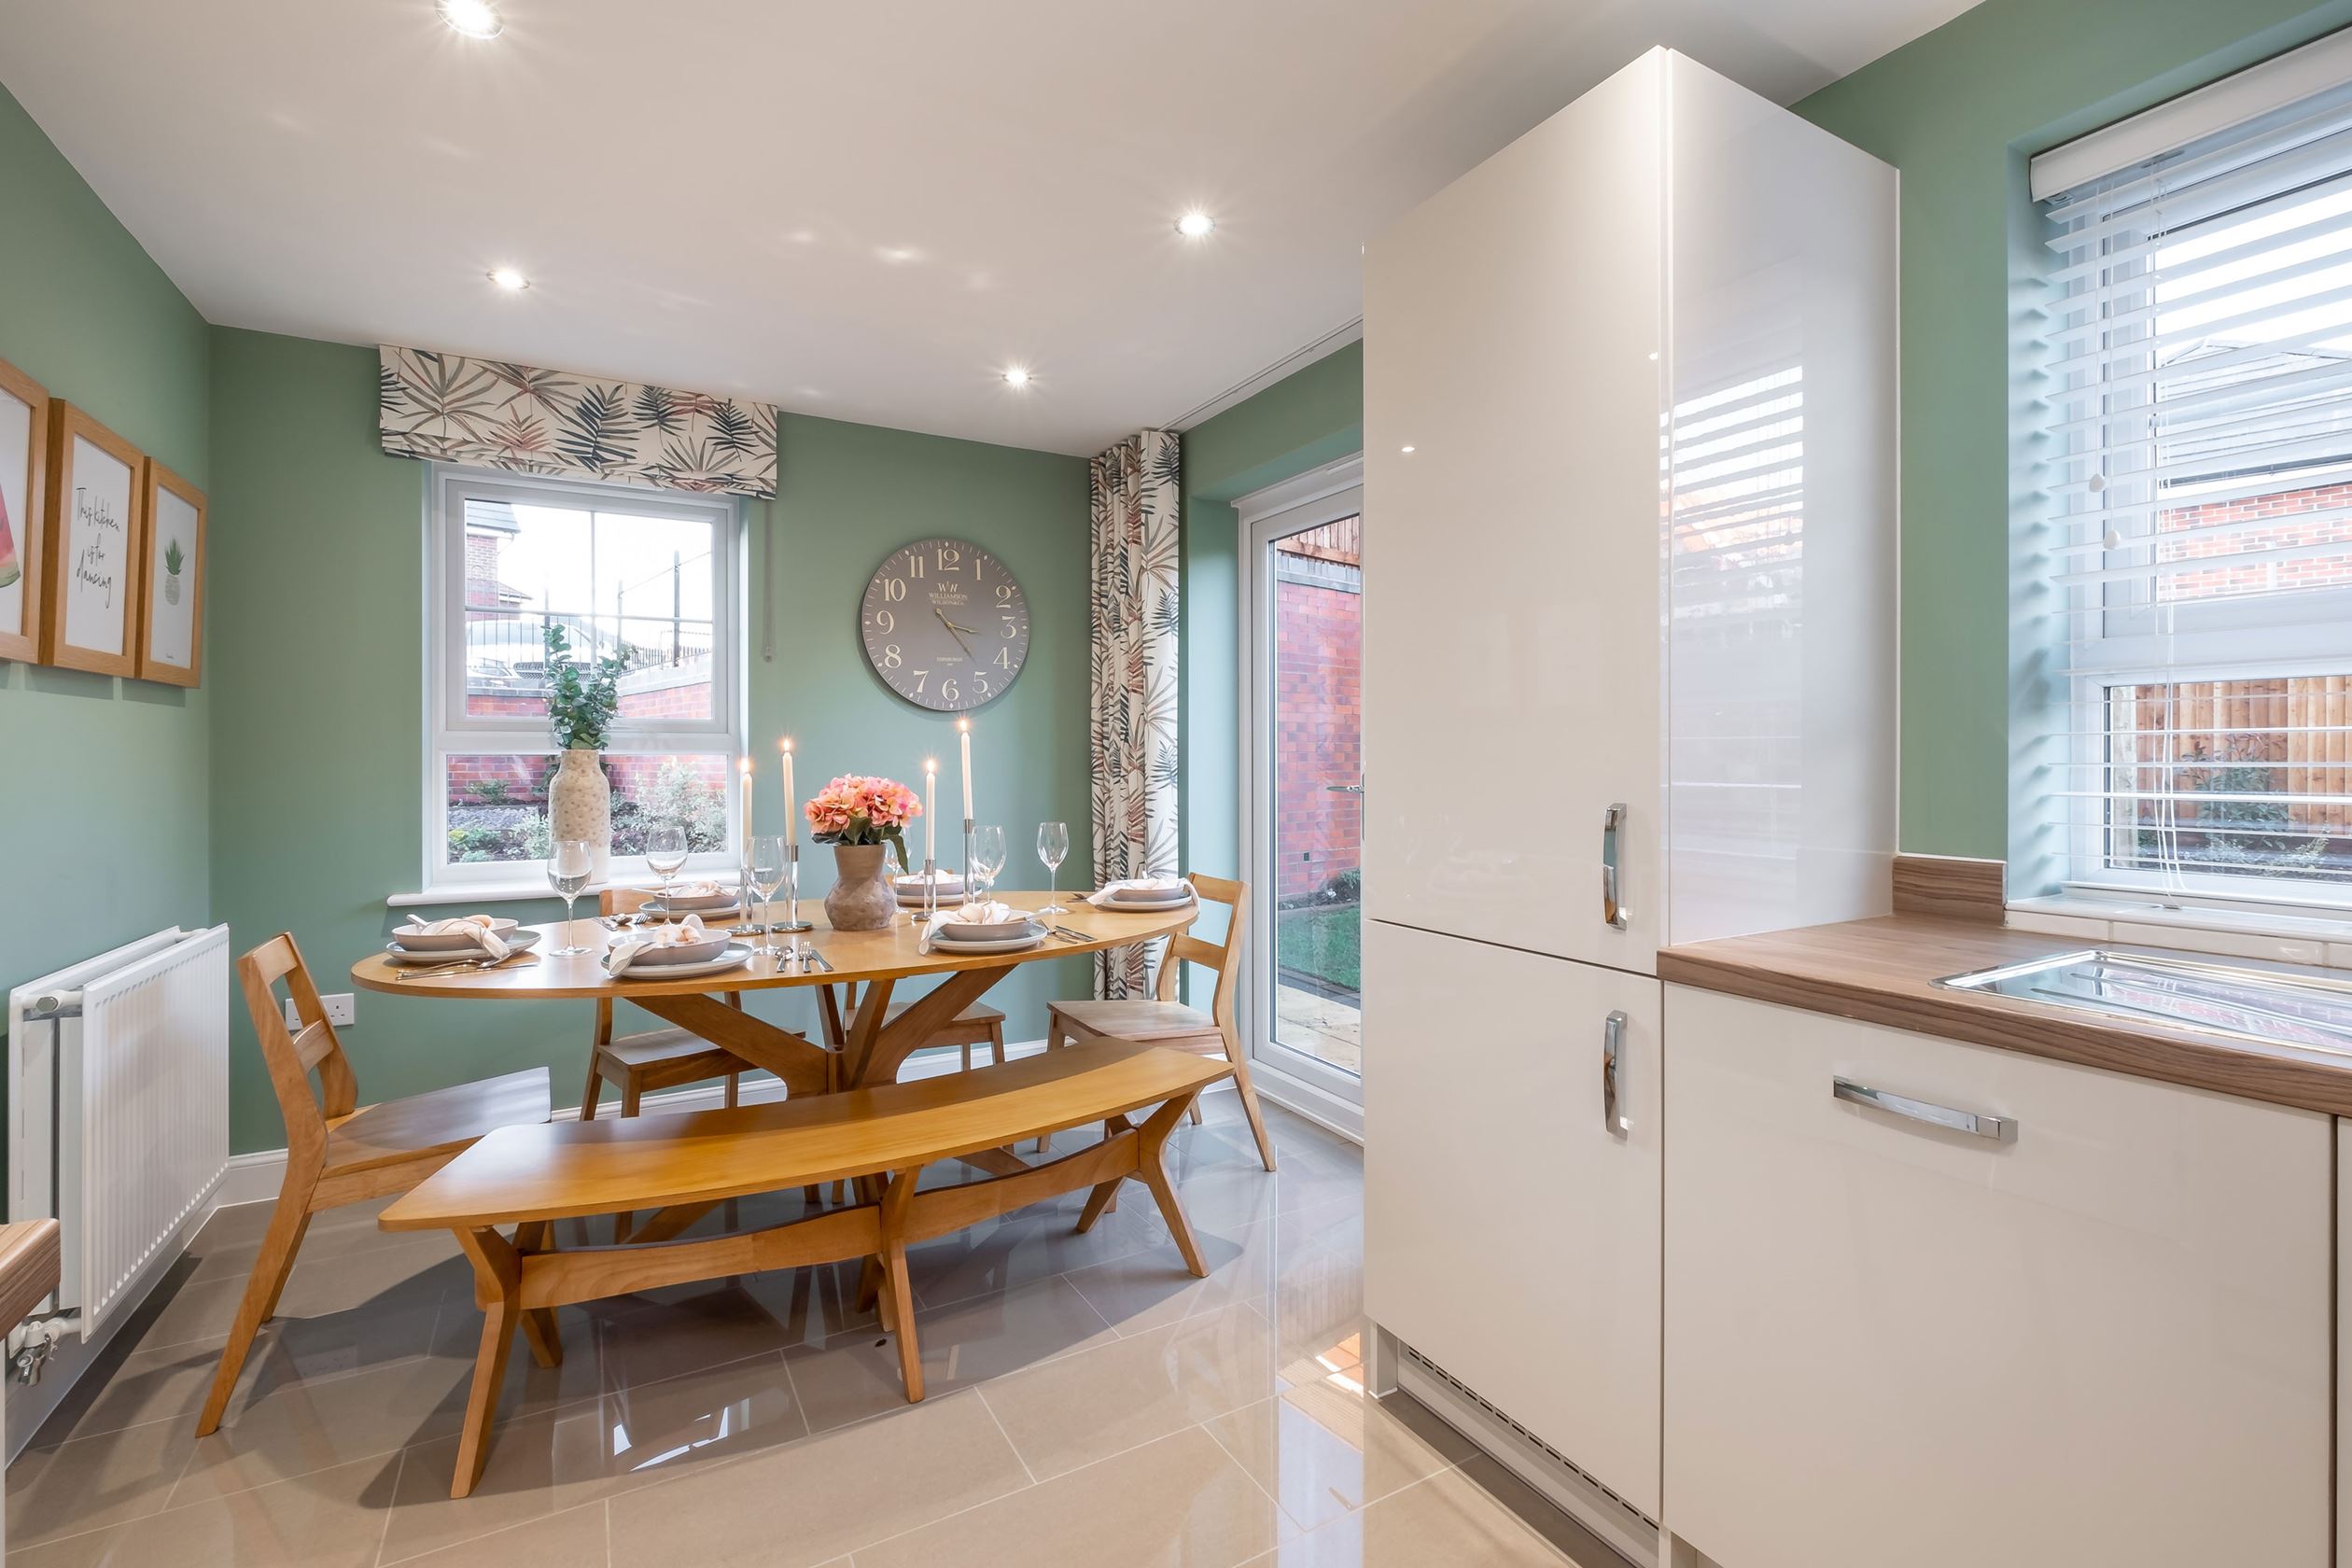 Property 3 of 9. Moresby Kitchen Dining